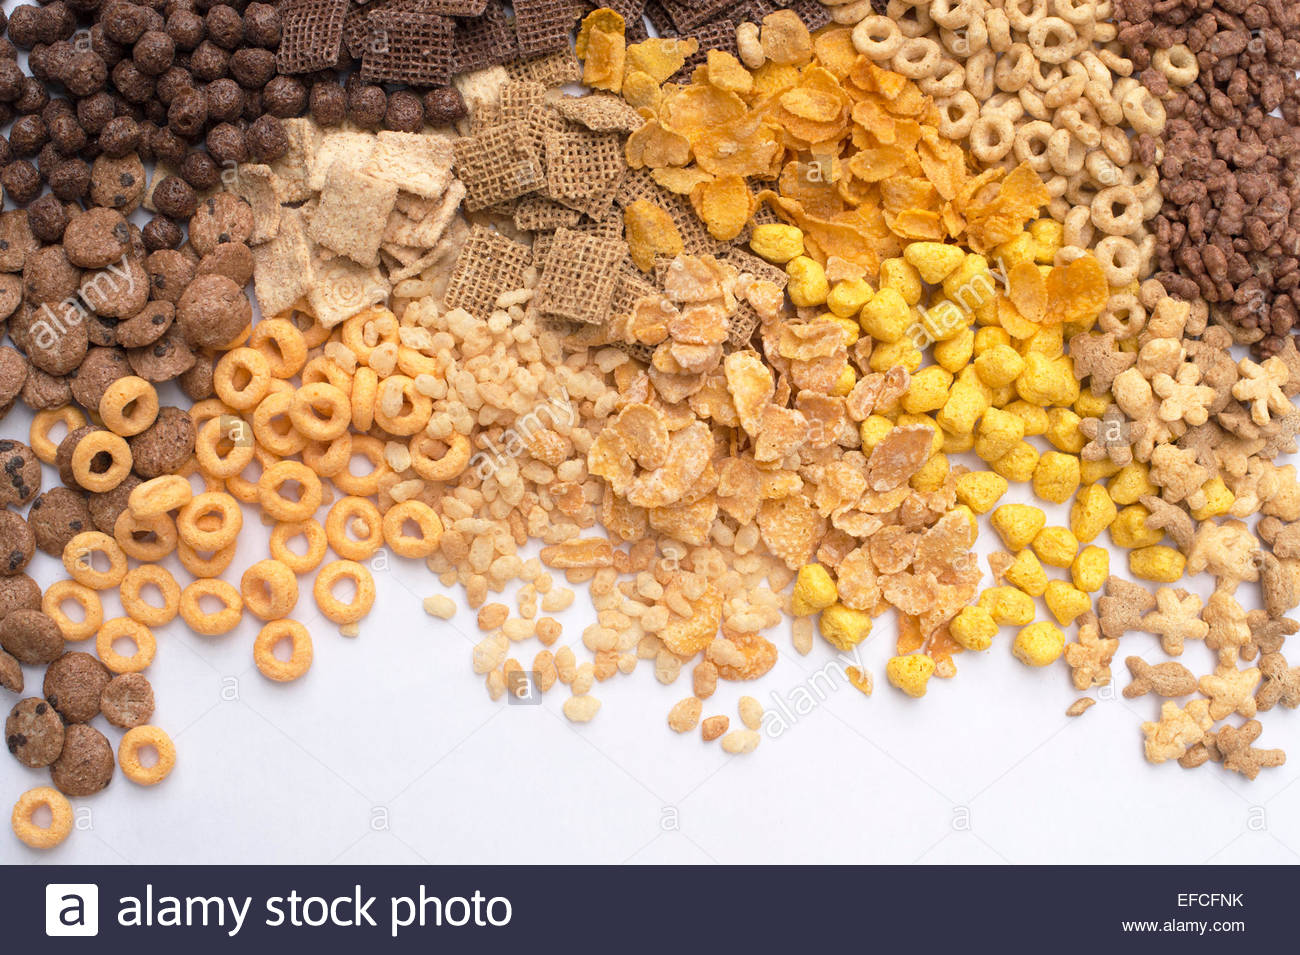 Assorted Childrens Breakfast Cereals On White Background Stock